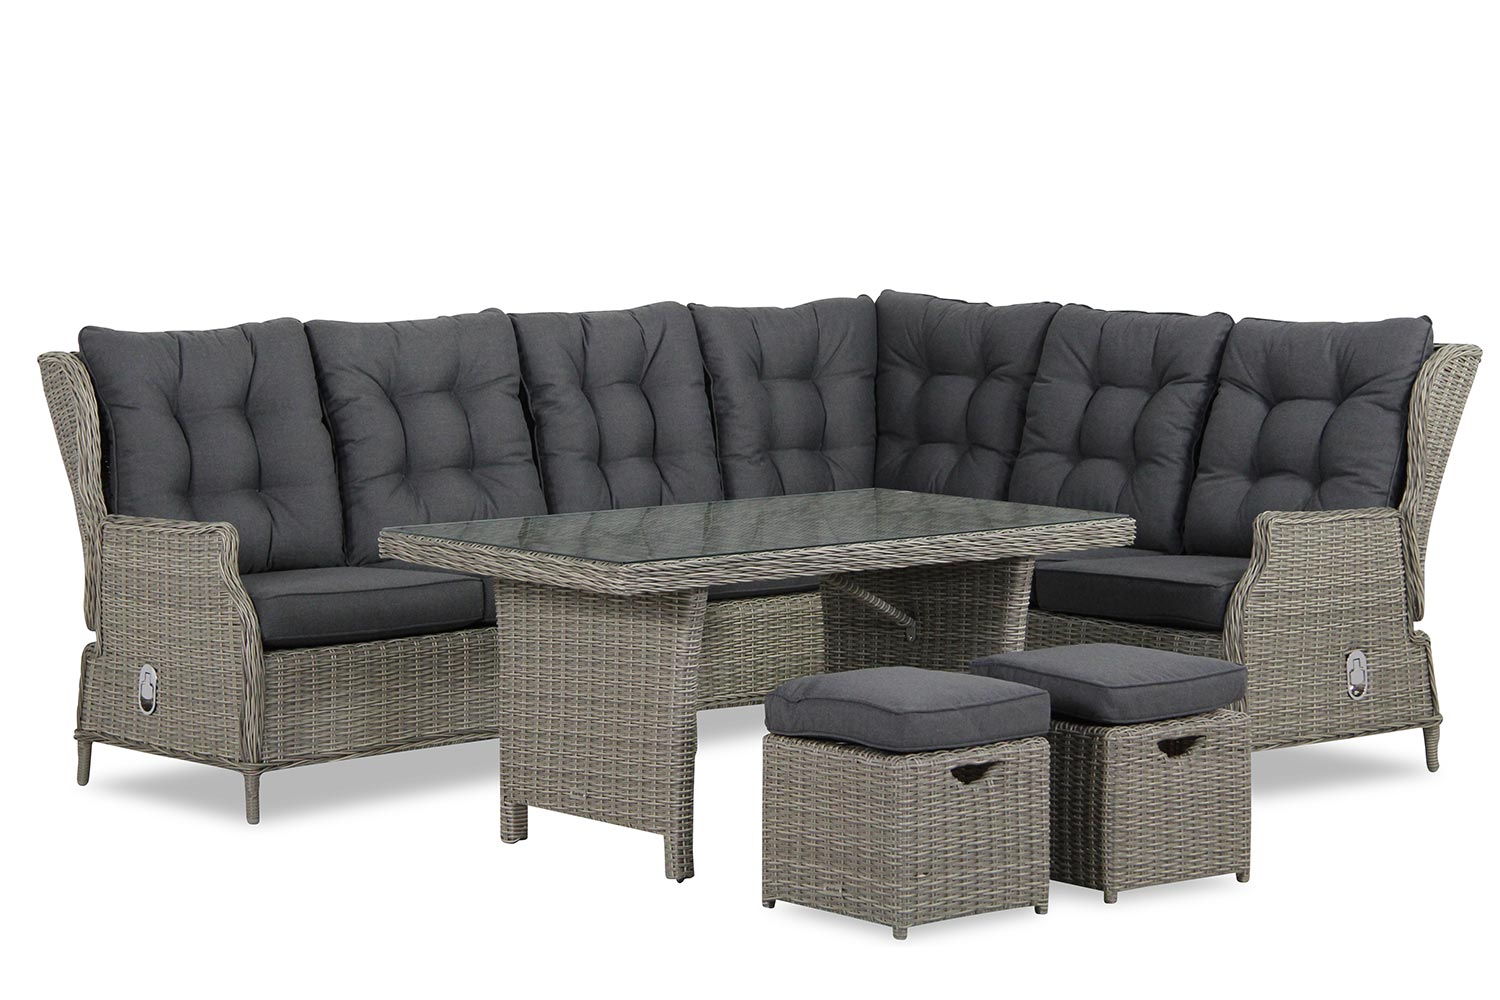 Garden Collections New Castle dining loungeset 7-delig aanbieding